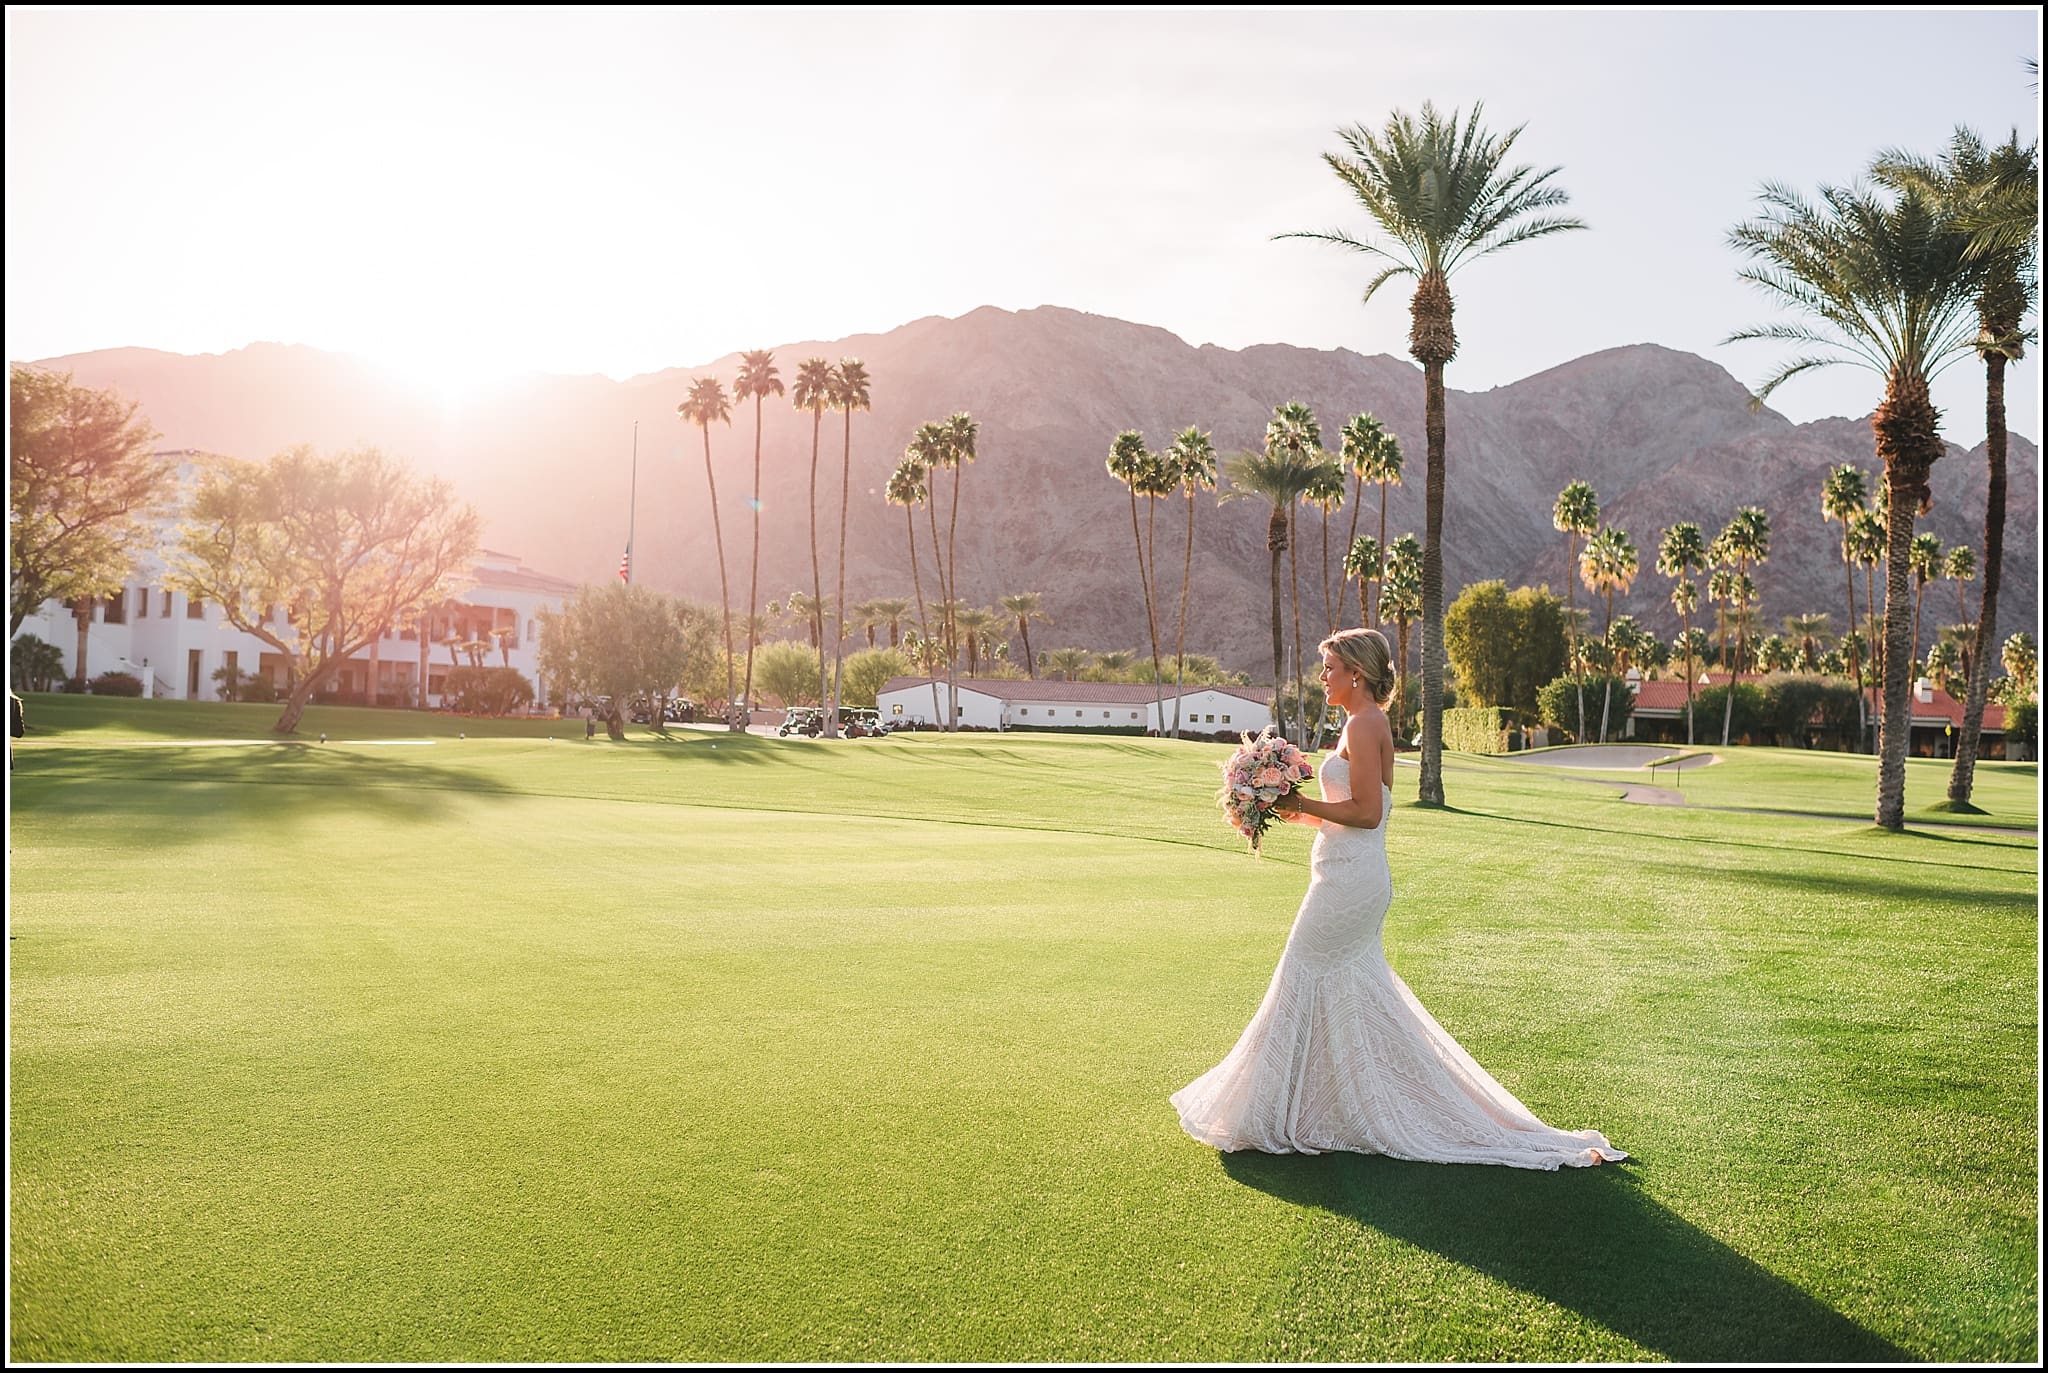  favorite wedding images 2016, wedding photos from 2016, our favorite wedding photos, la quinta country club wedding